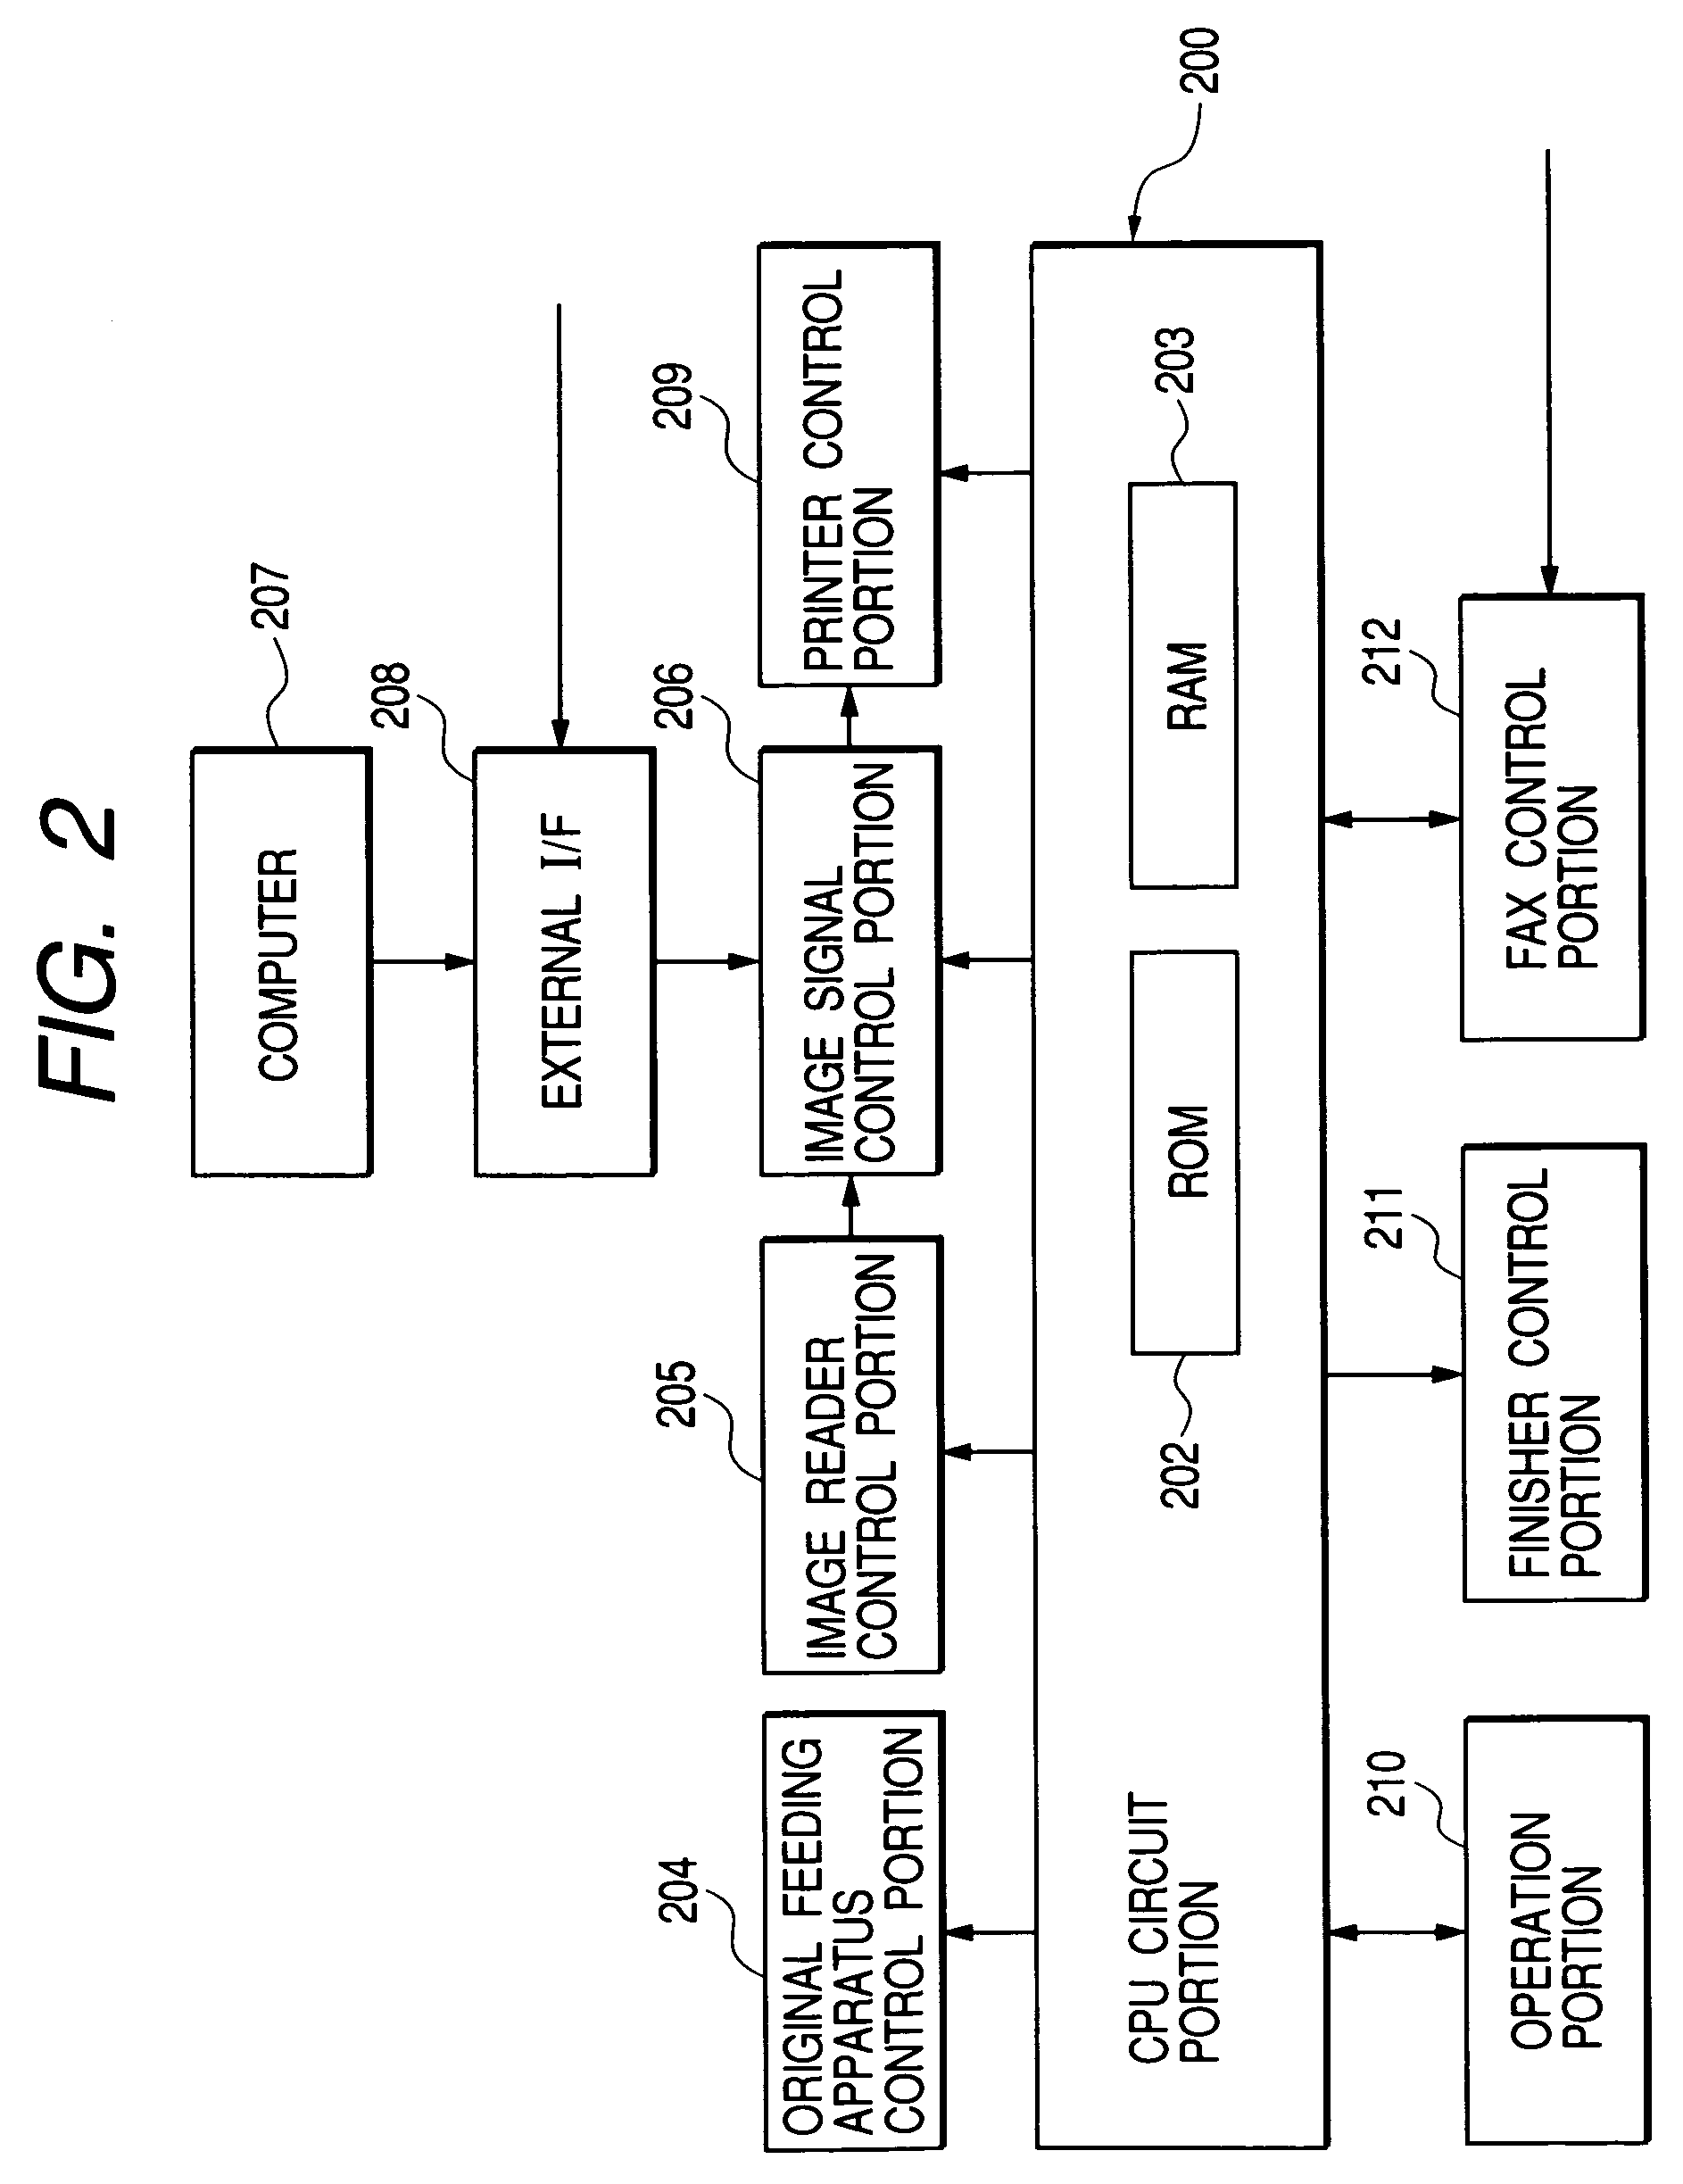 Sheet processing apparatus for storing supplied sheets while preceding sheet are processed